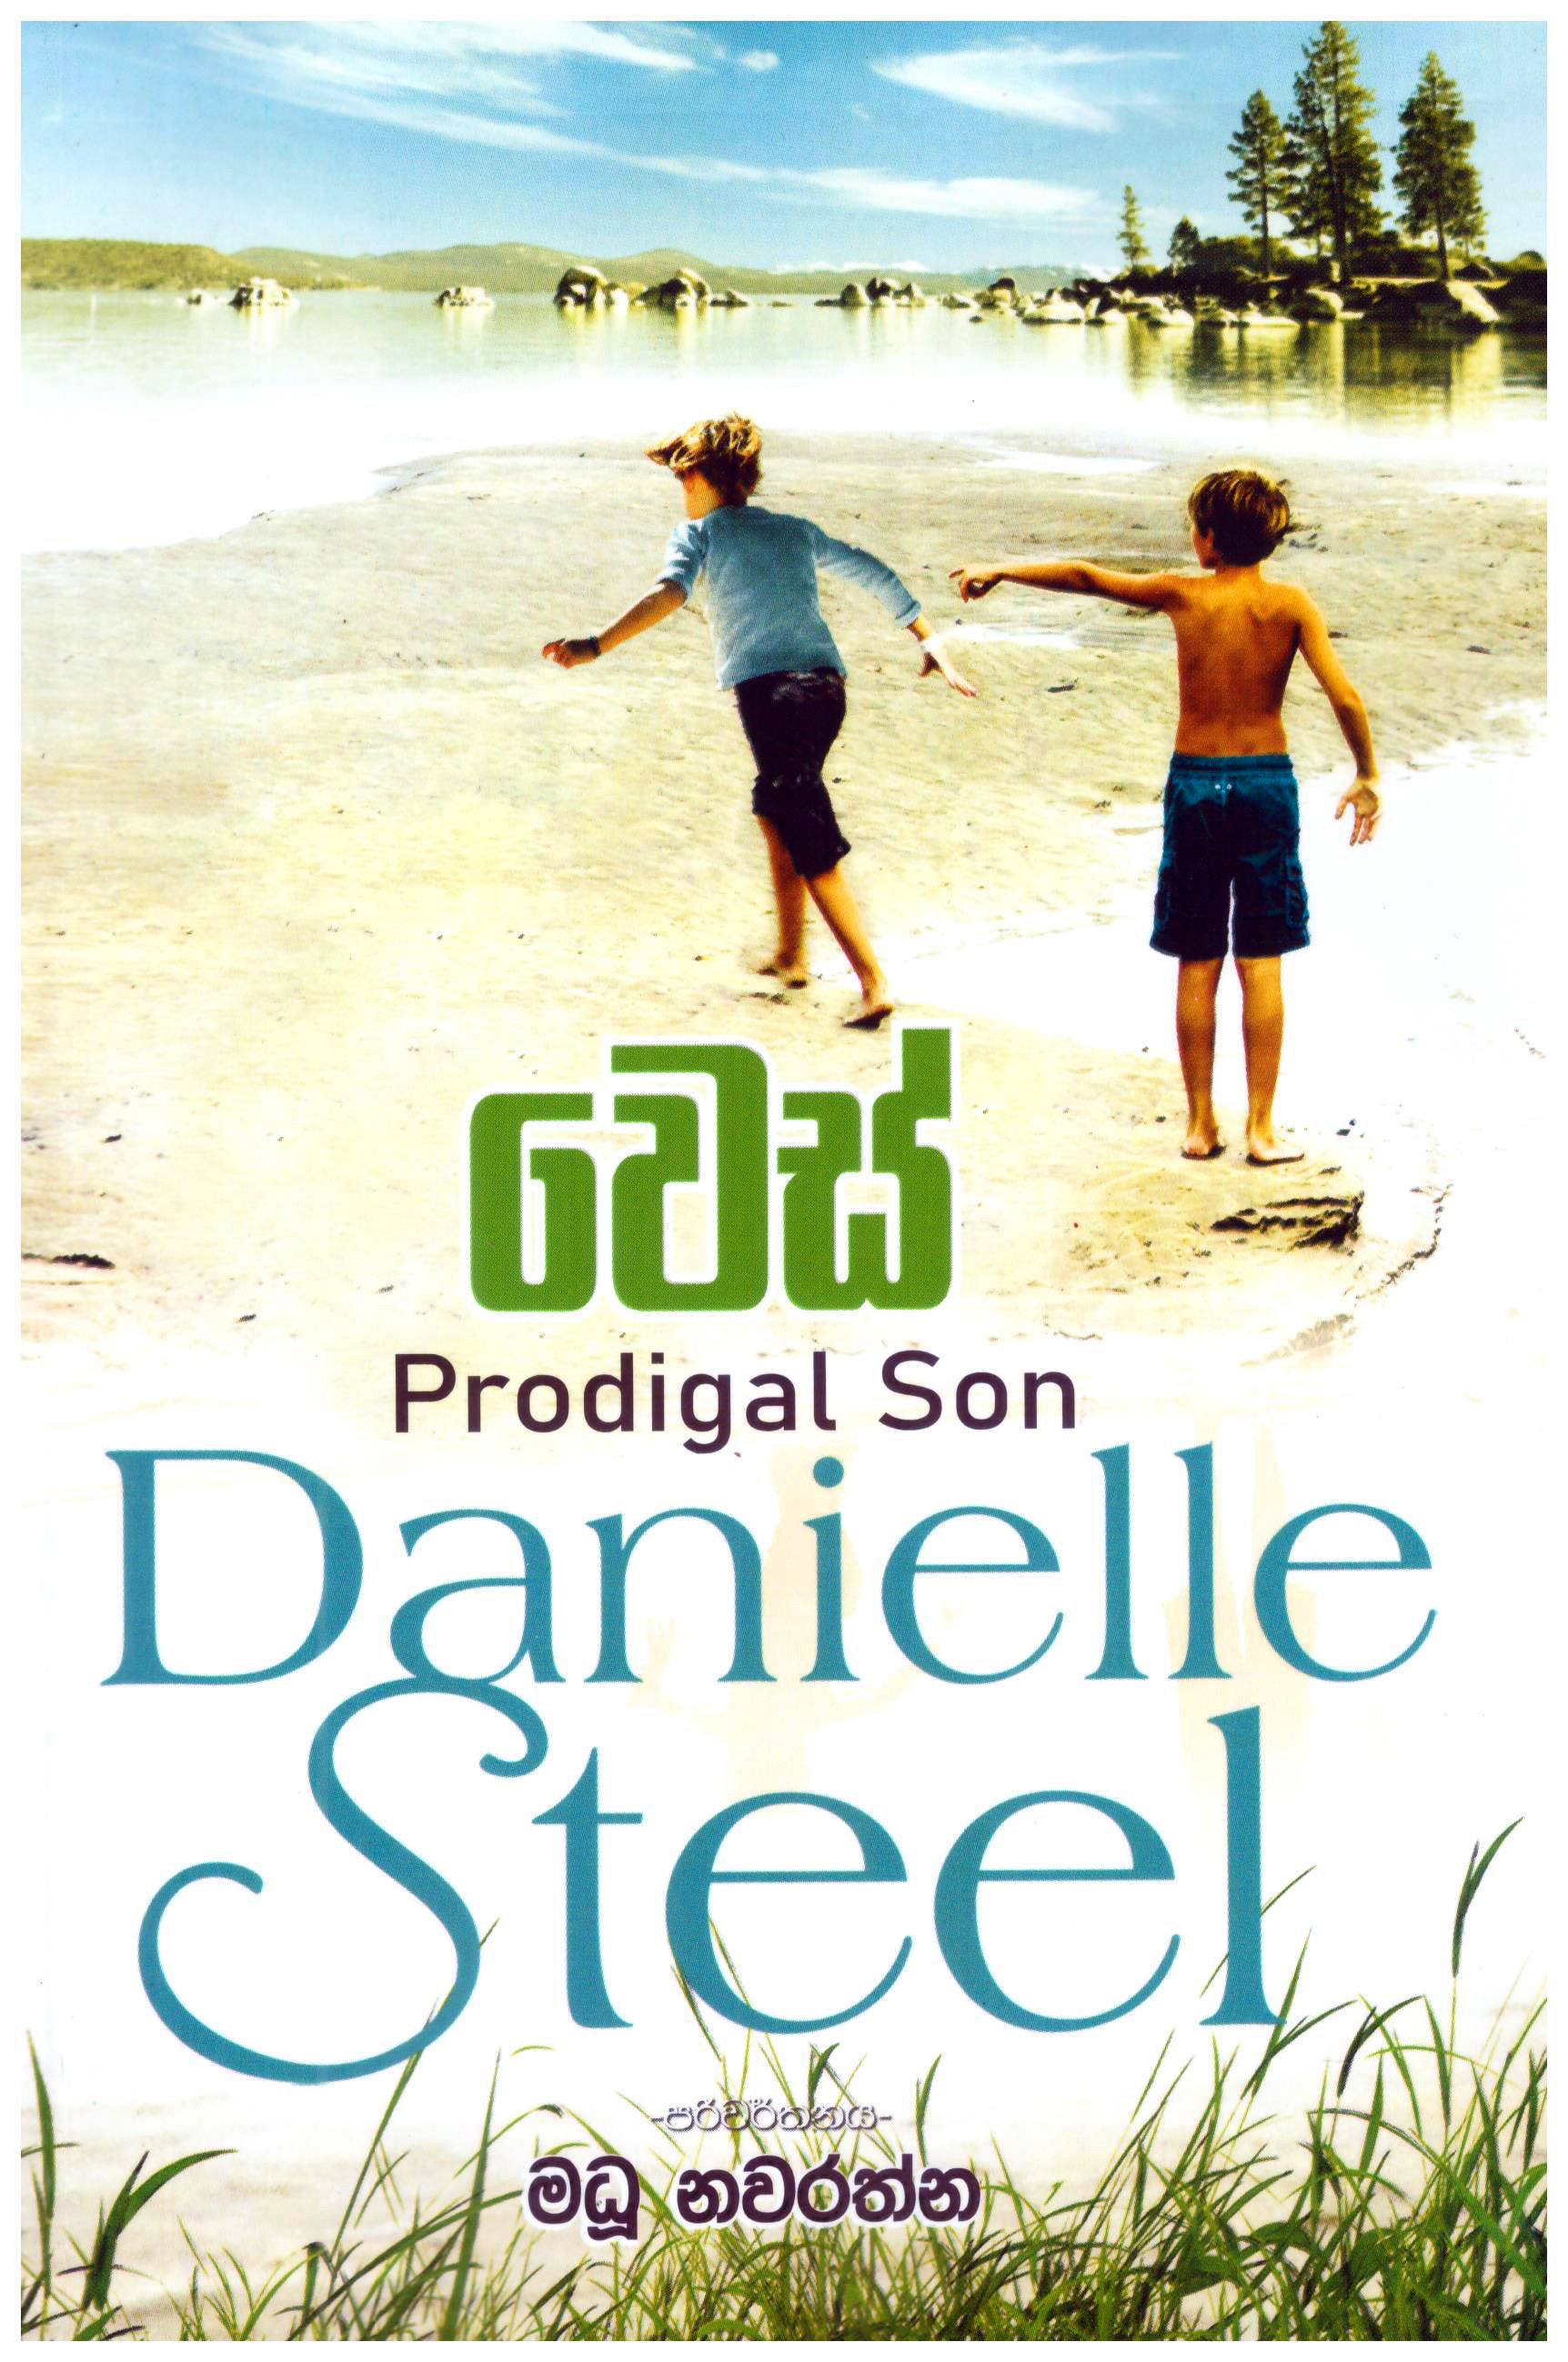 Wes - Translations of The Prodigal Son by Danielle Steel